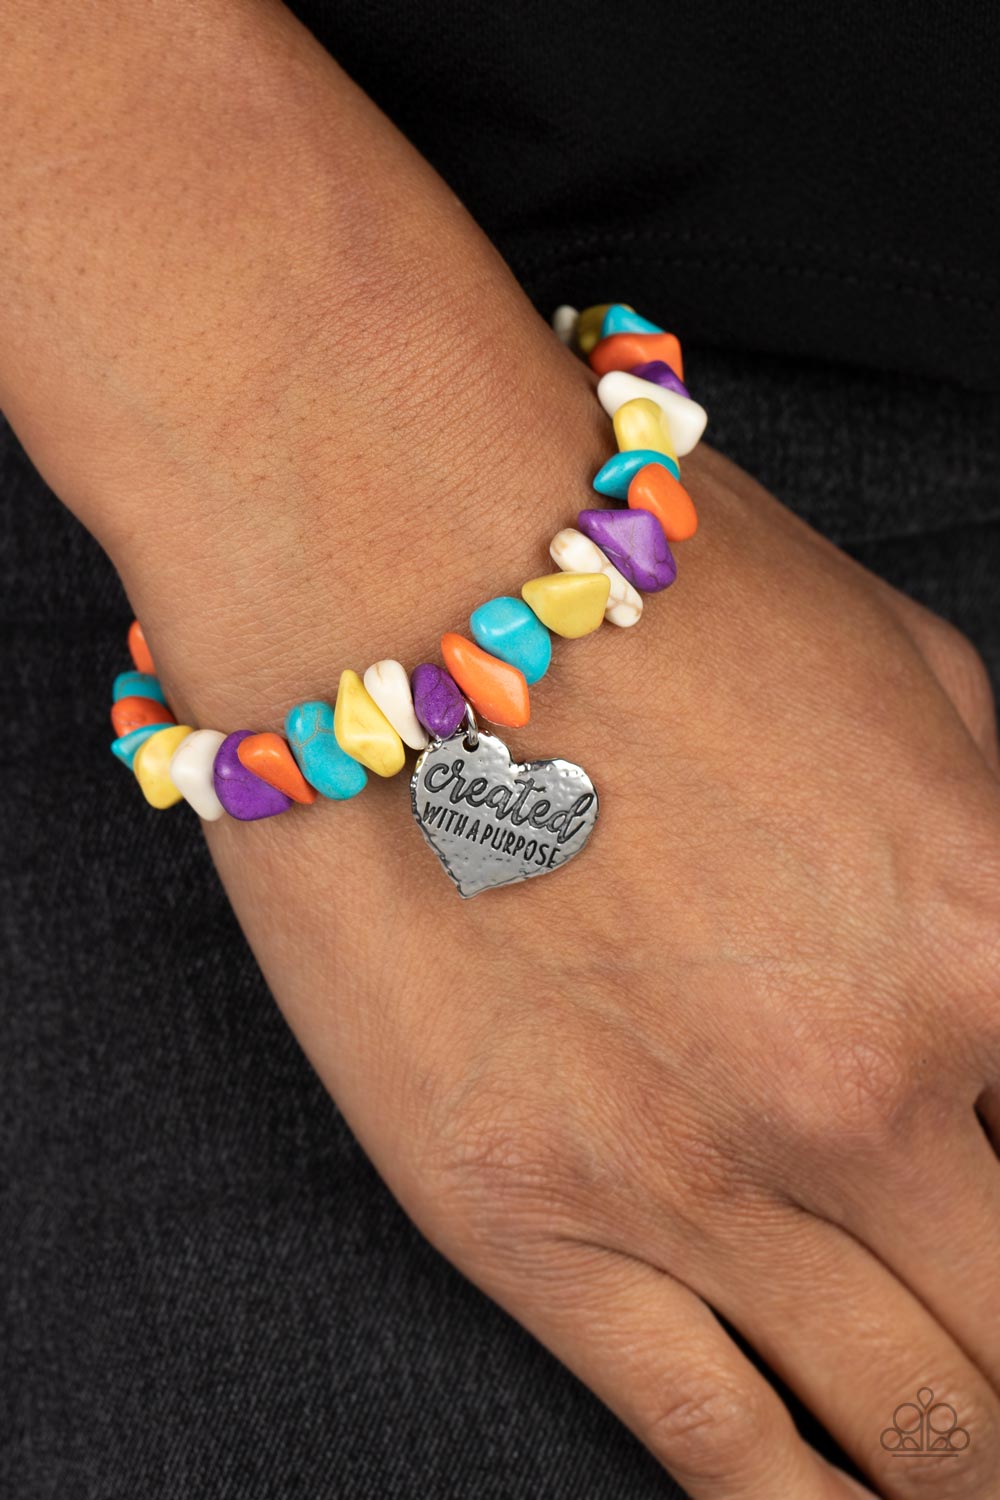 Stony-Hearted - Multi Stone & Silver Heart "Created with a purpose" Charm Paparazzi Stretch Bracelet